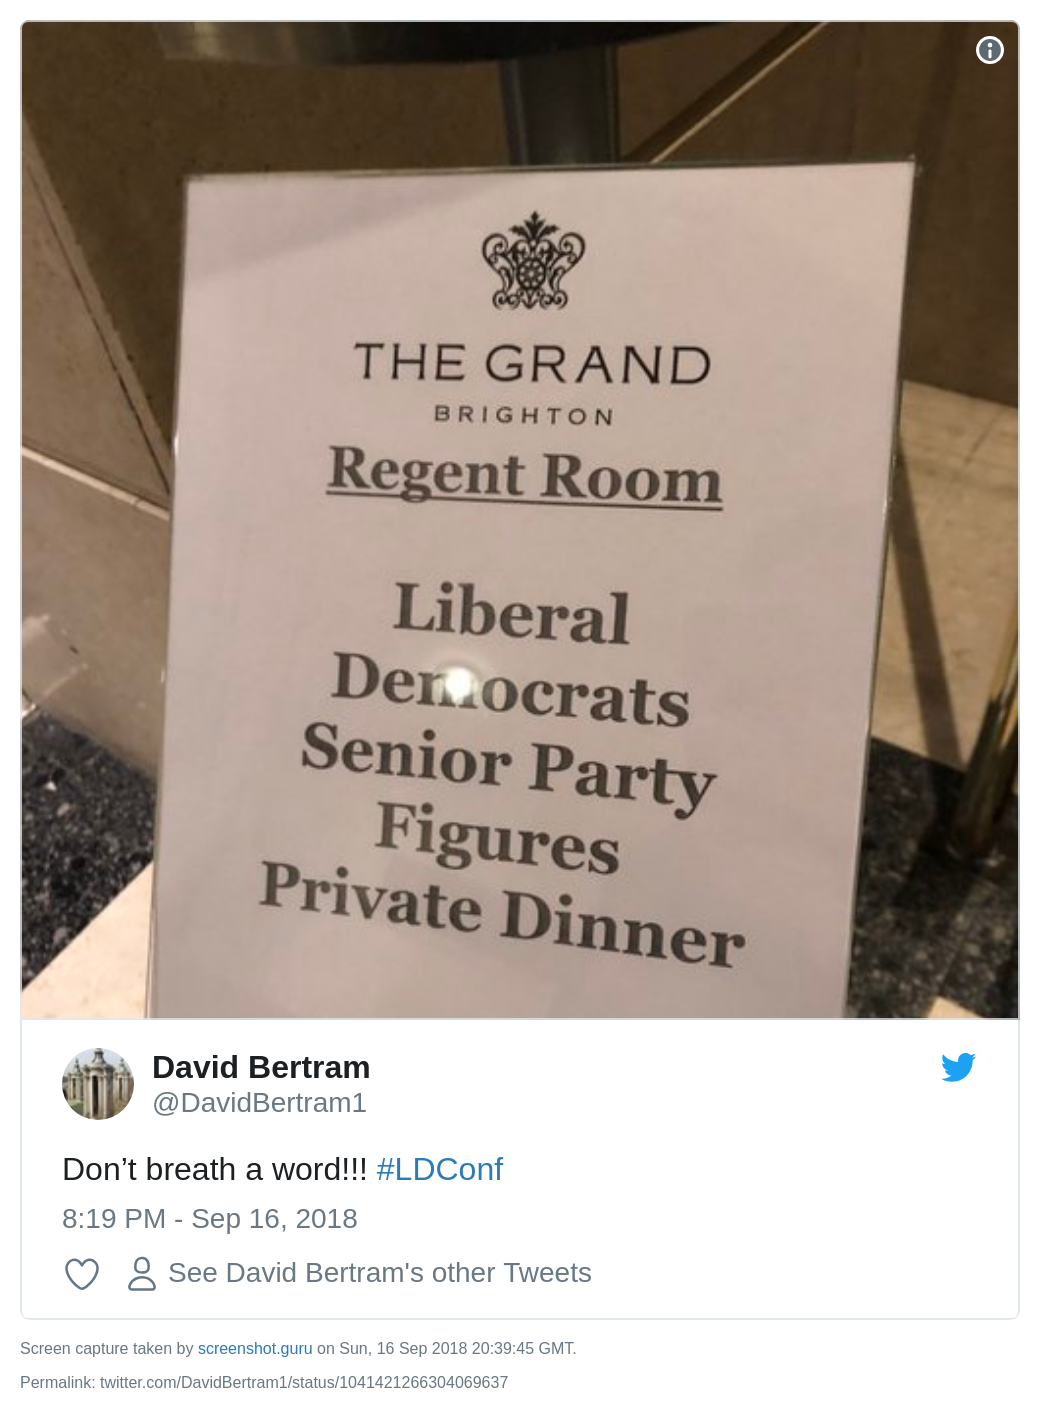 Top secret meeting sign at Lib Dem conference in Brighton